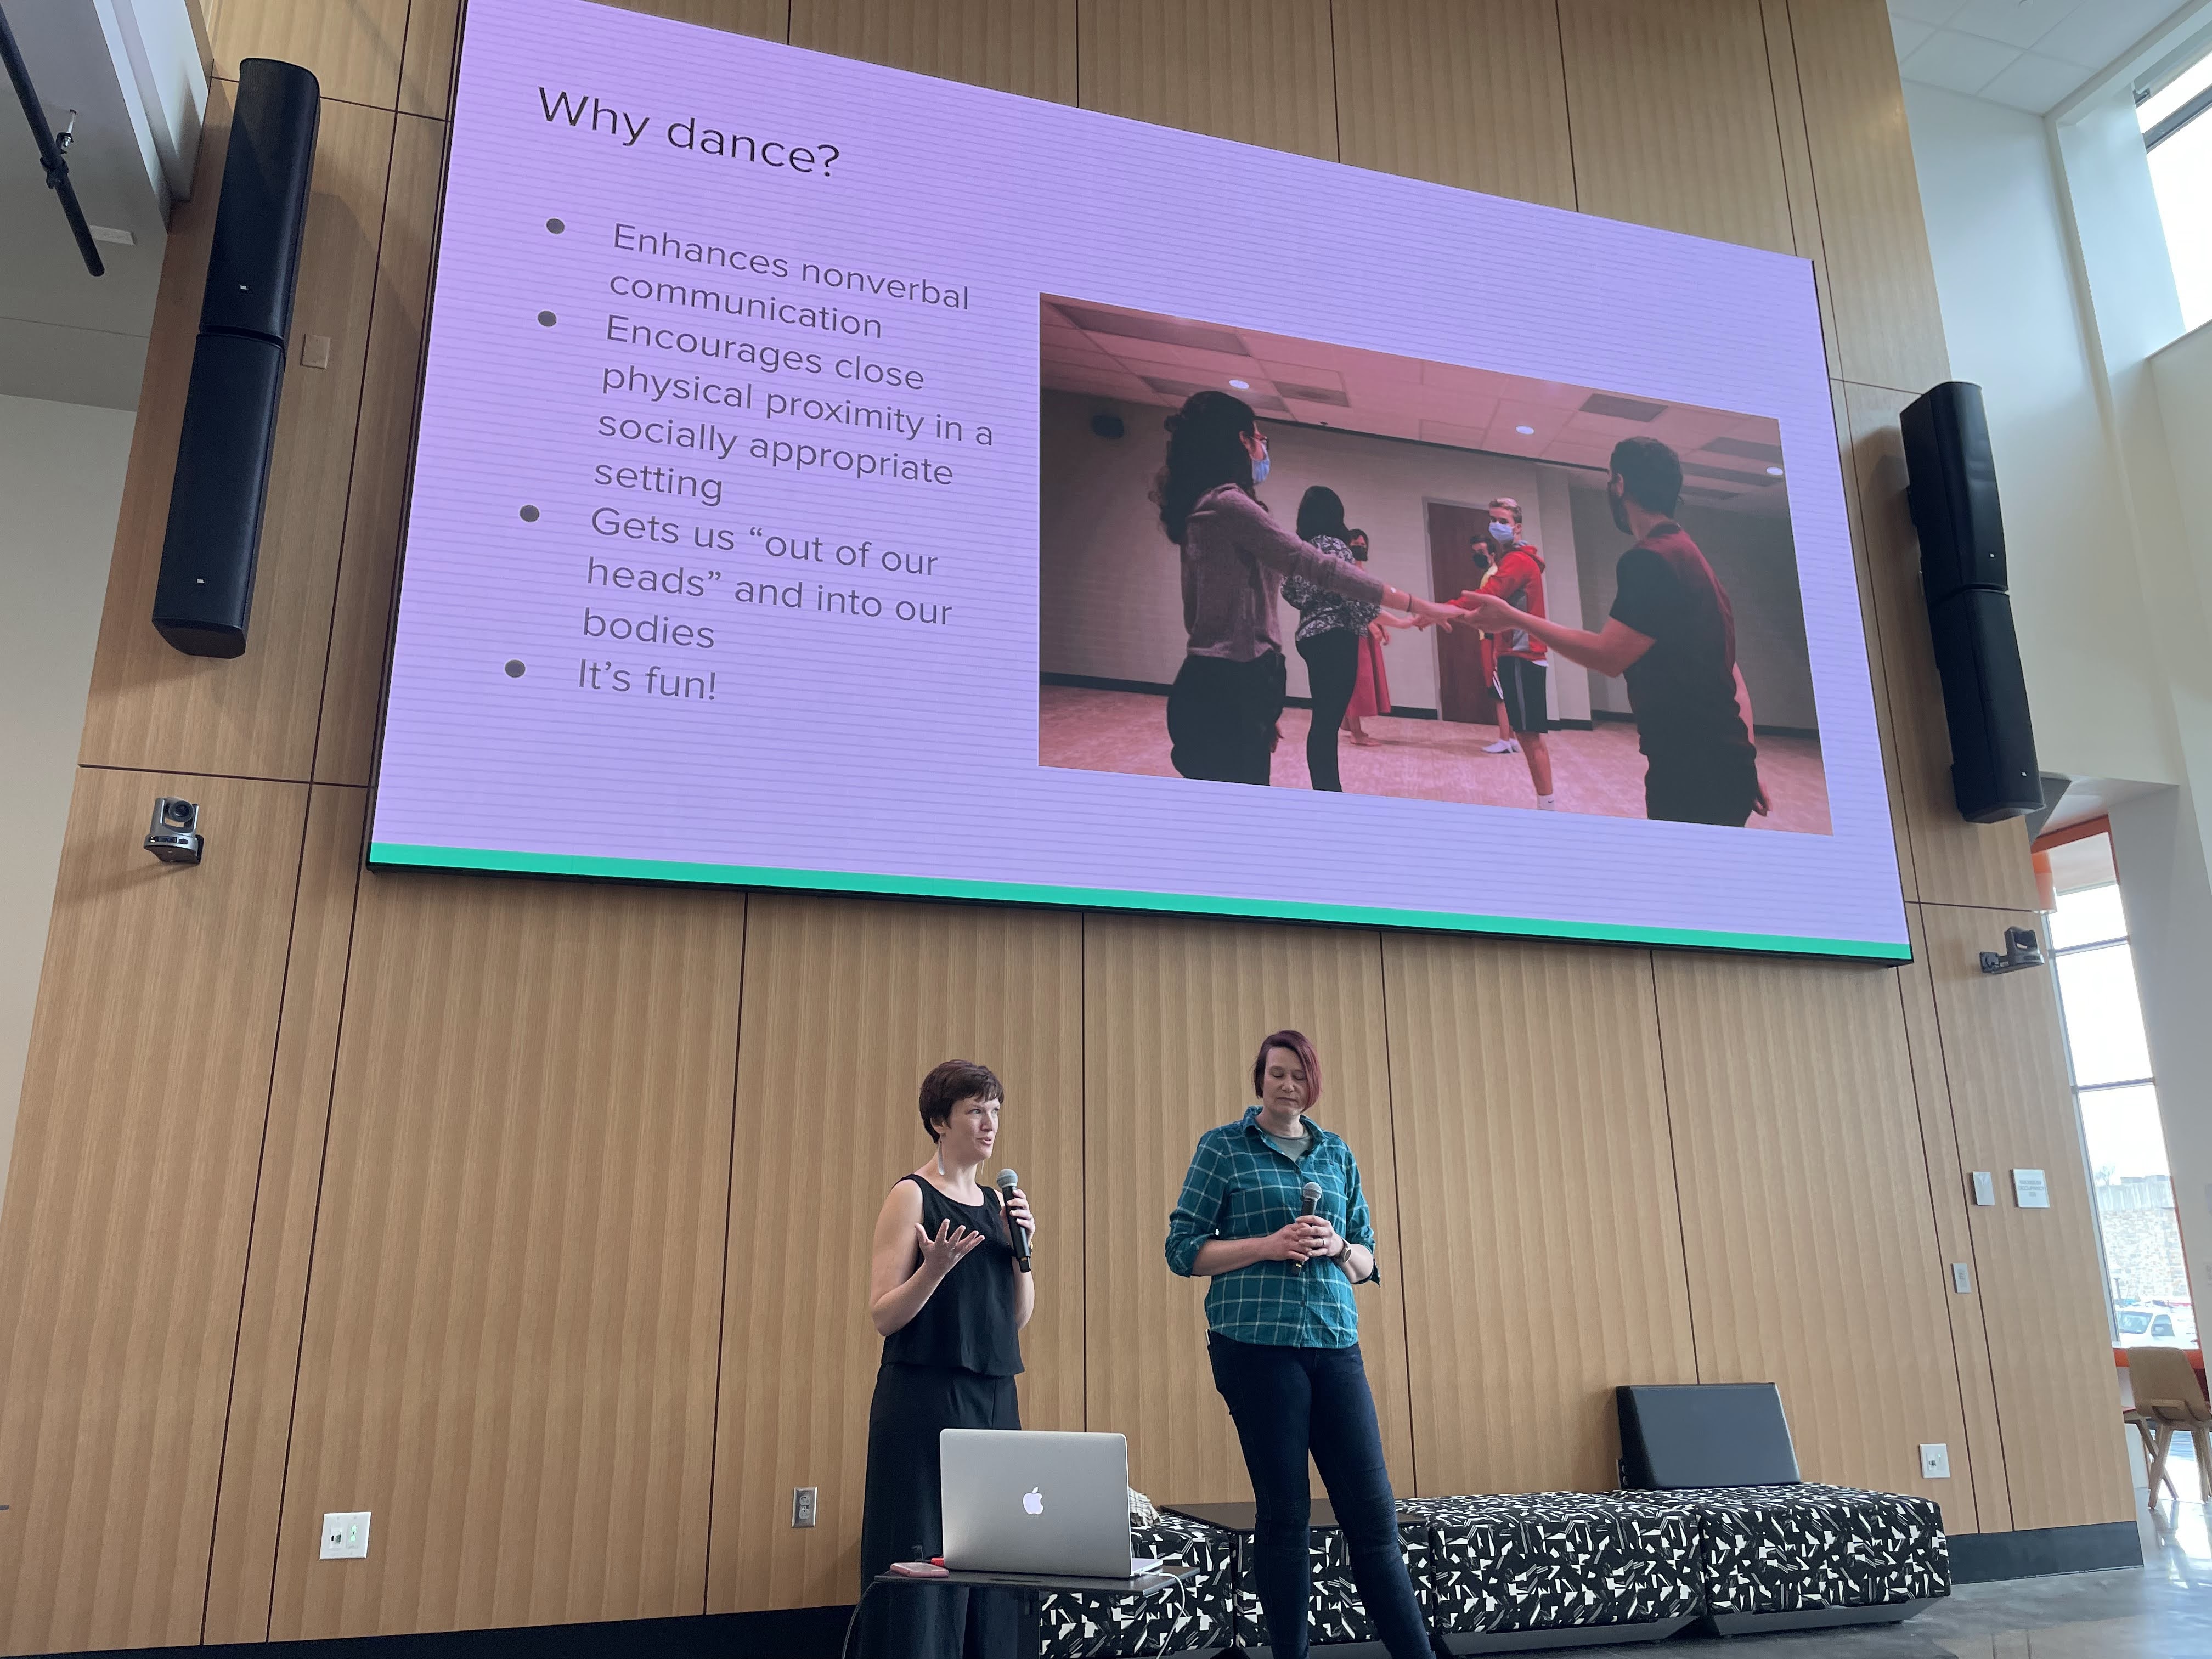 Two woman, one in a black dress and one in a blue shirt and jeans, stand under a presentation screen that reads ‘Why dance?’